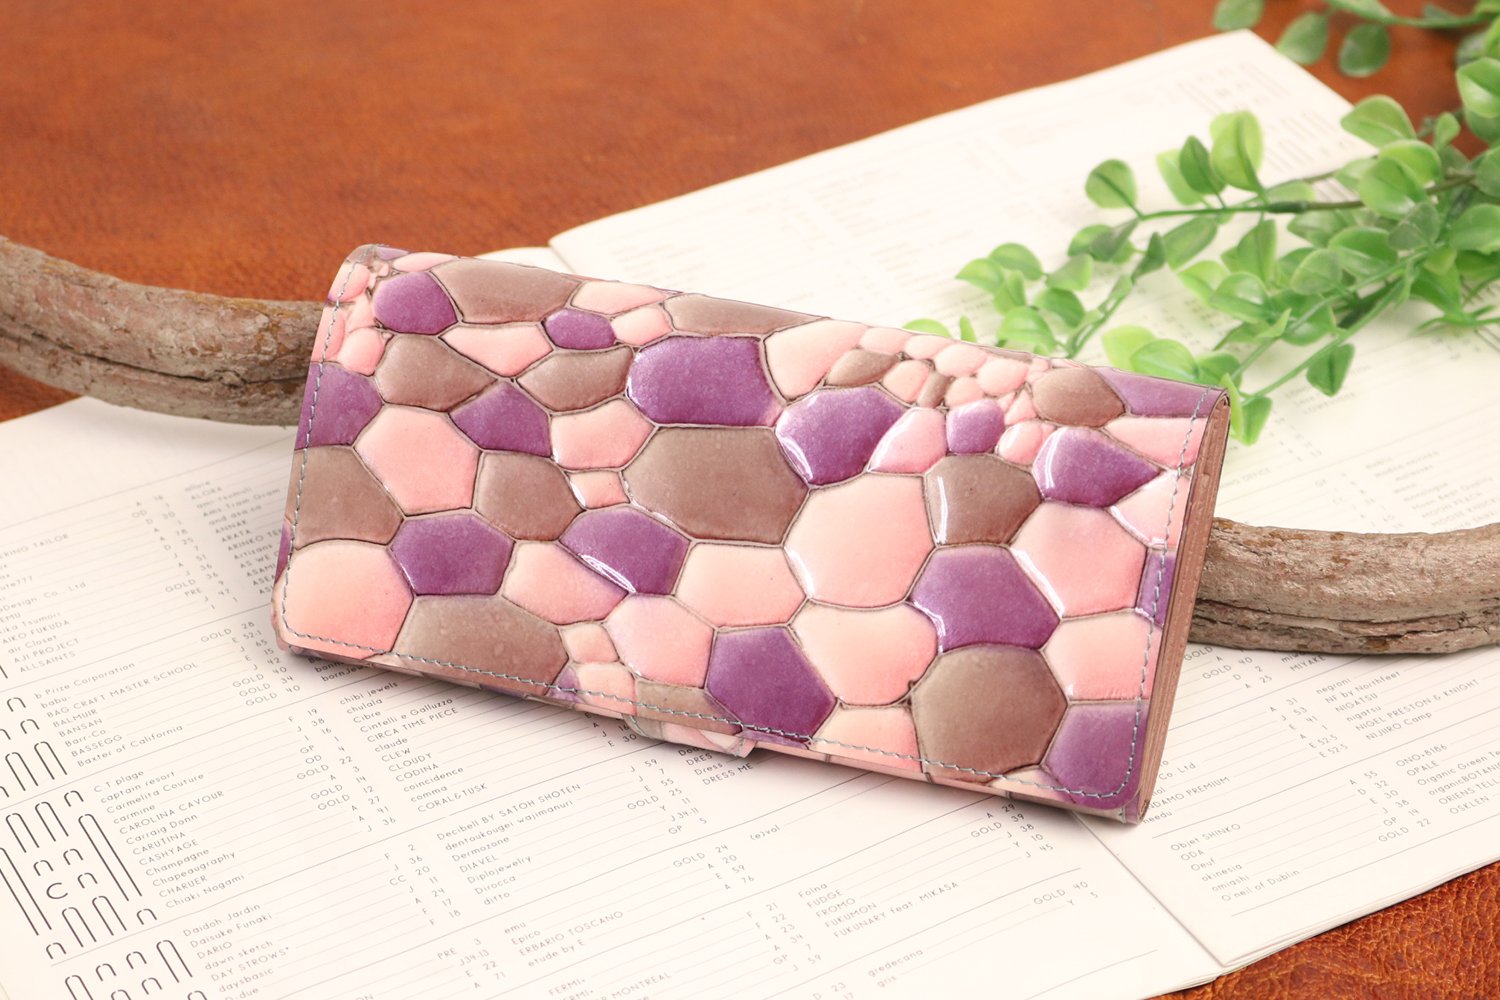 FU-SI FERNALLE / BAGILIO collection Beautiful colors that catch the eye Beautiful enameled Italian leather long wallet